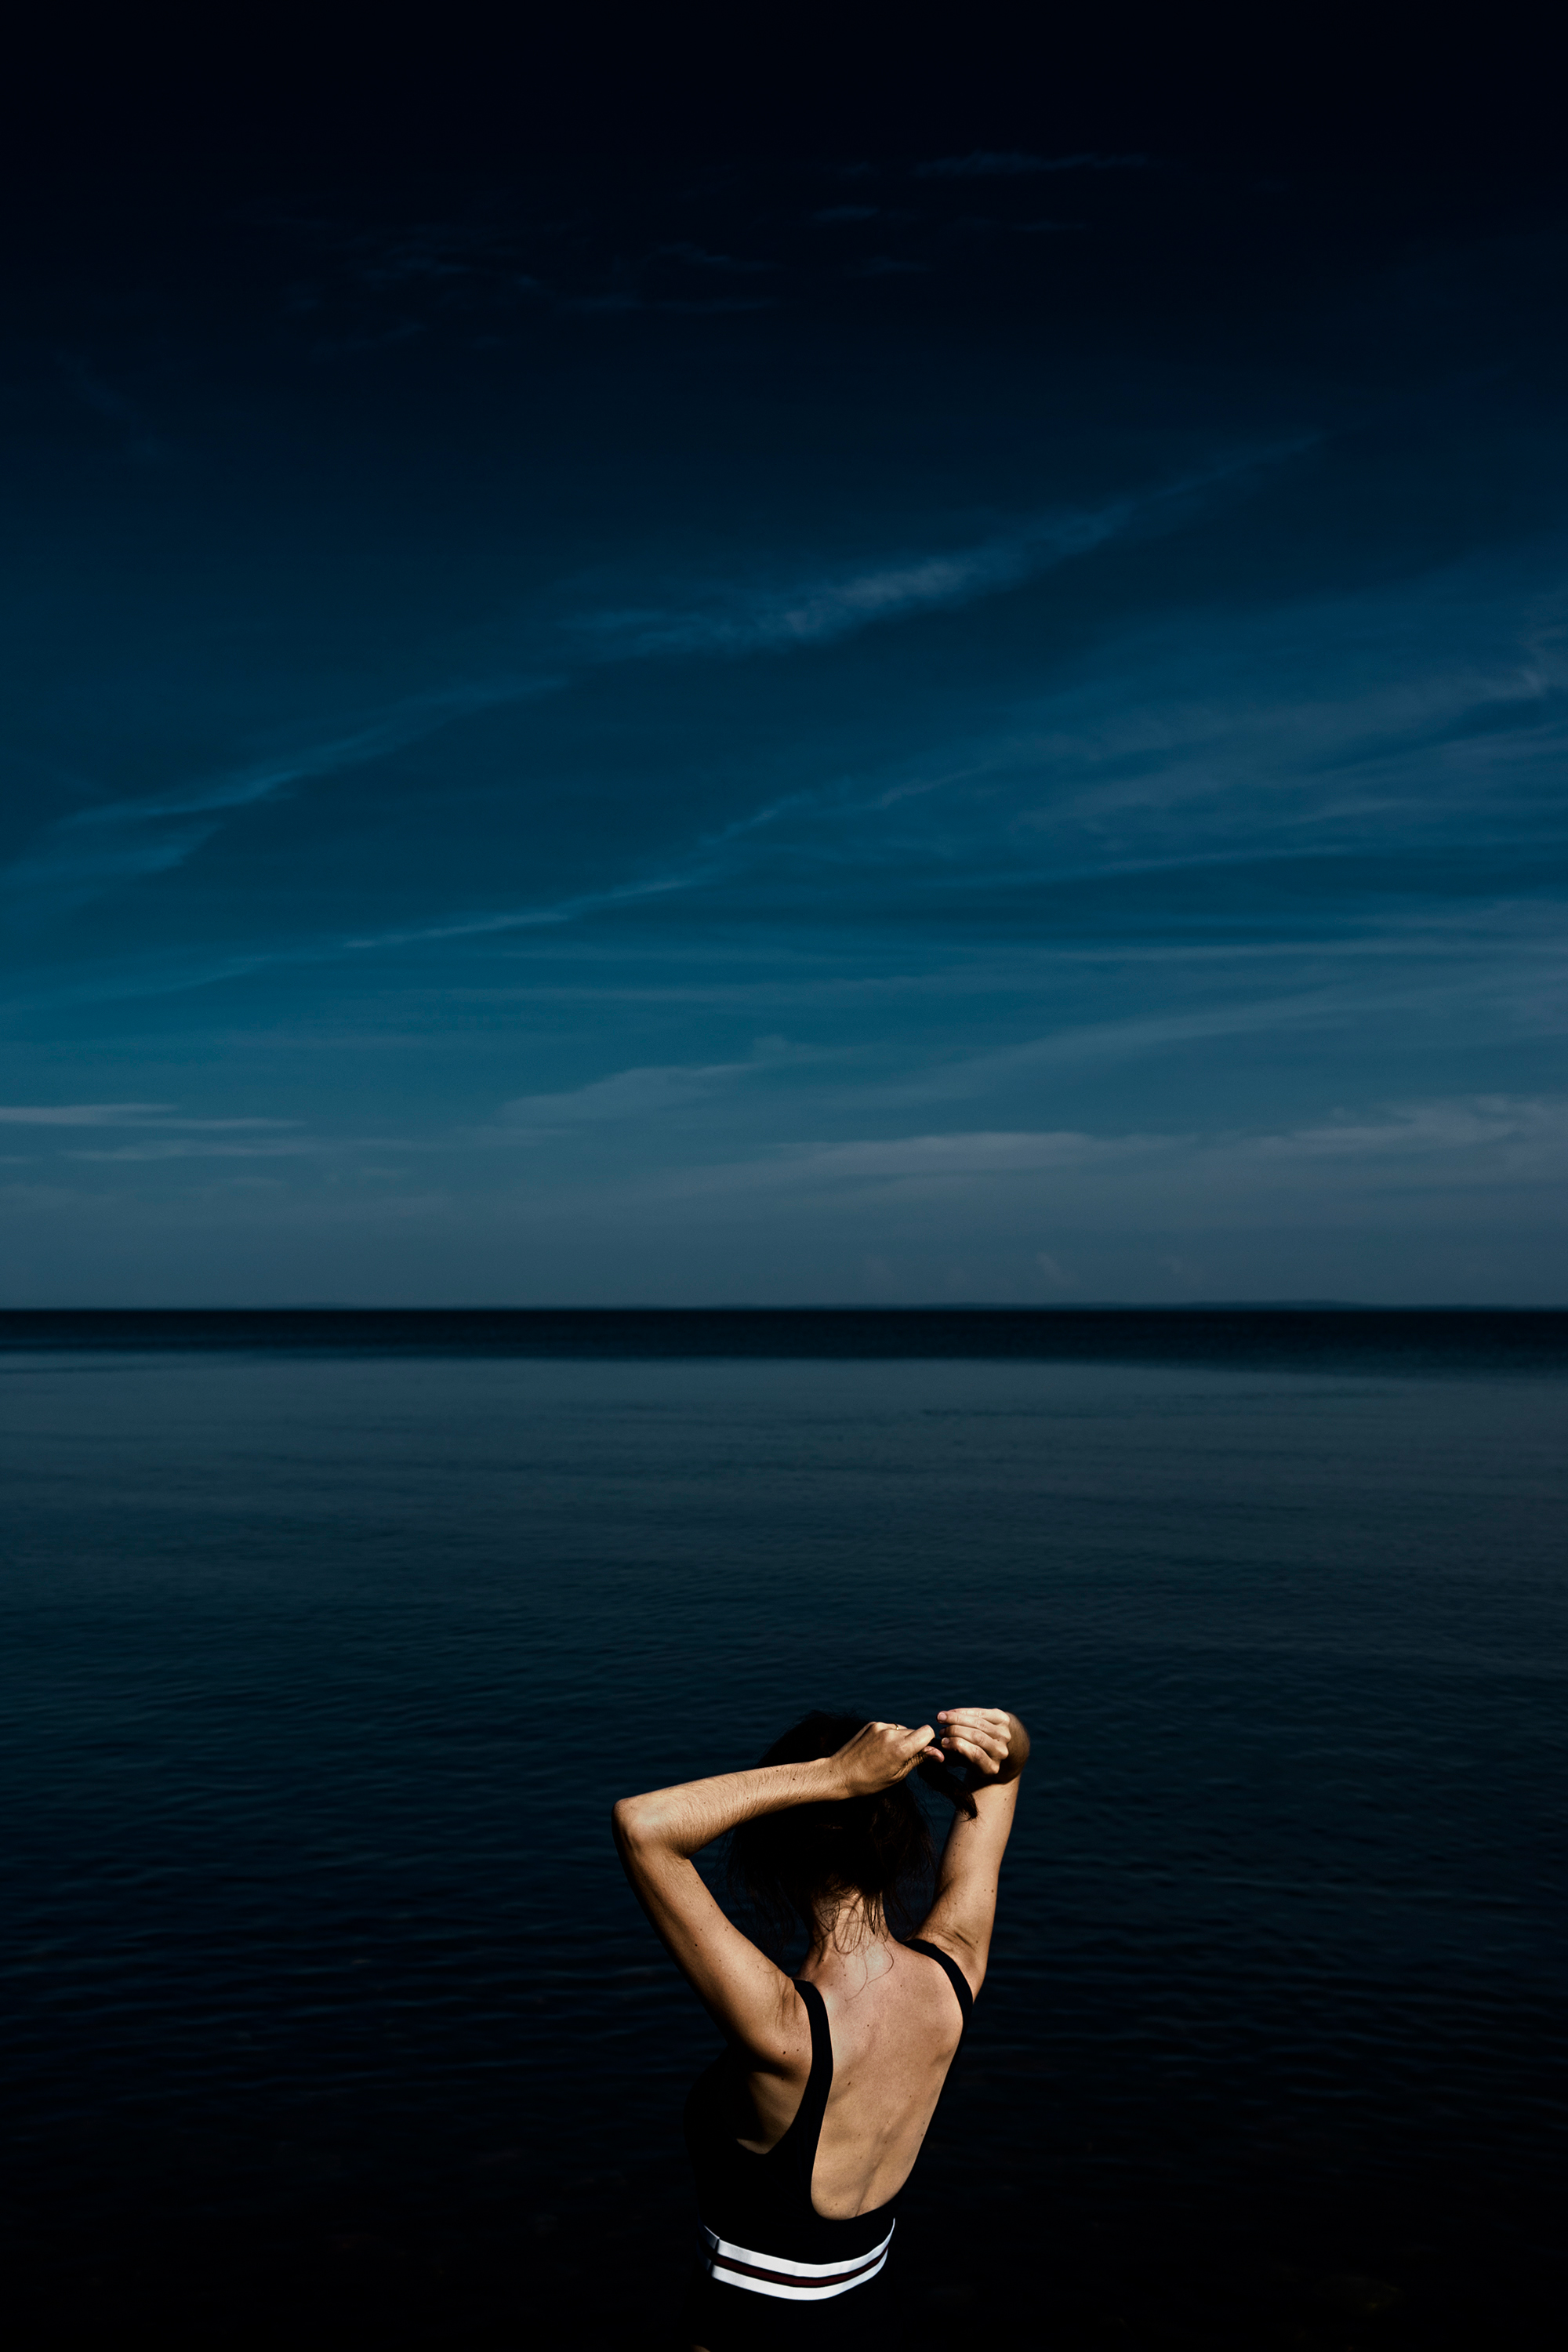 A women gets ready to swim in the waters of Bay of Fundy in Blomidon, Nova Scotia, Canada.